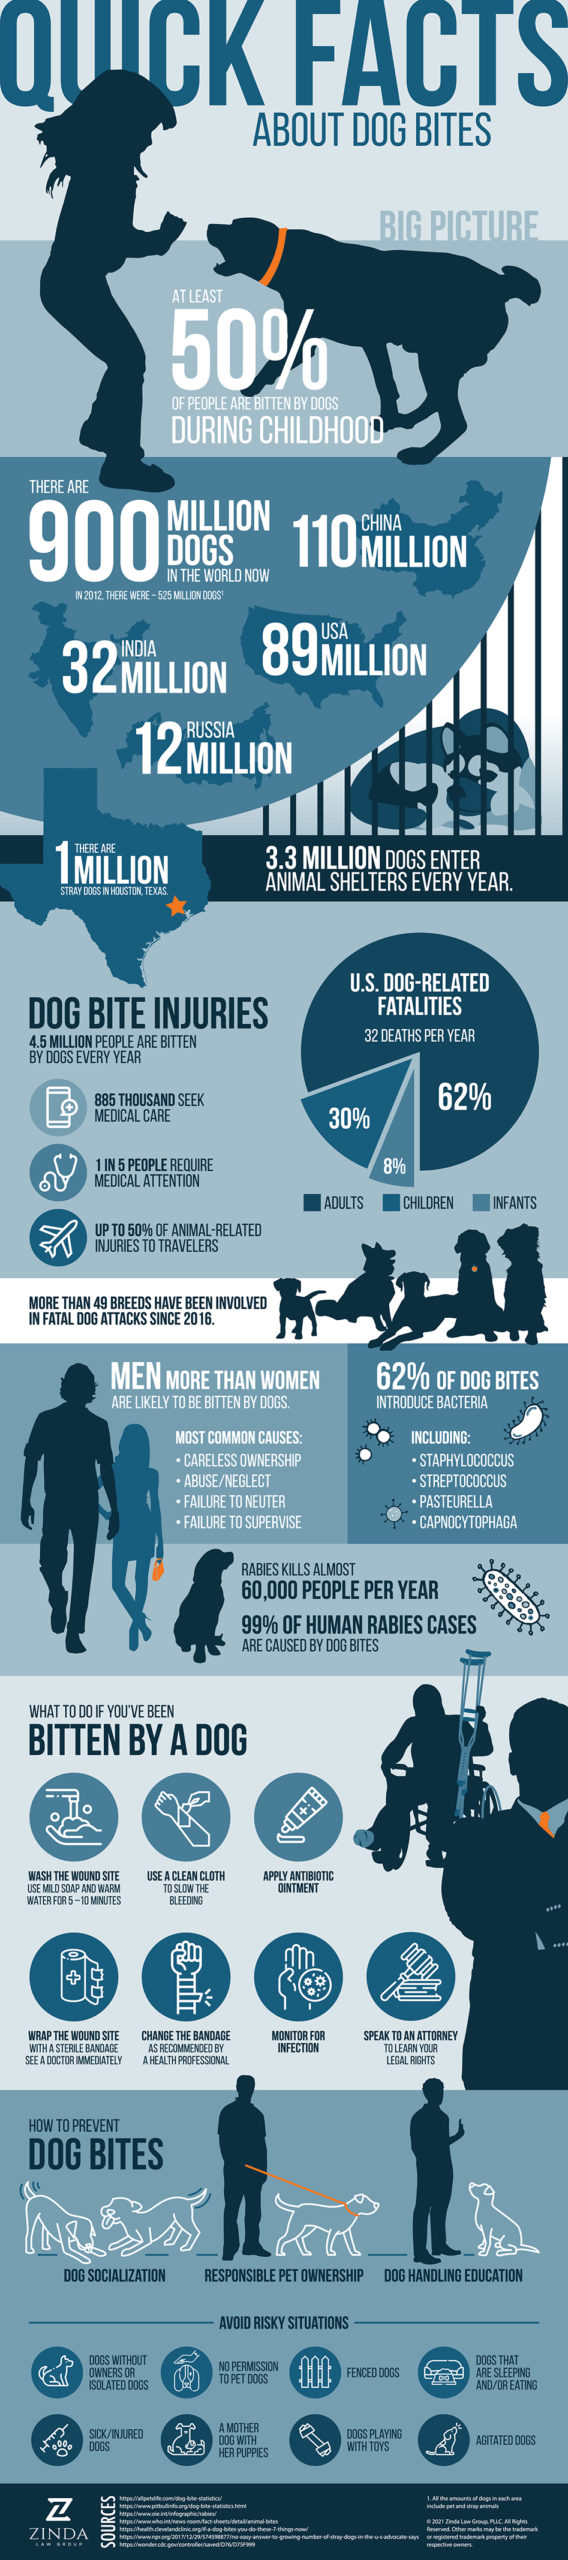 Quick Facts About Dog Bites [Infographic]